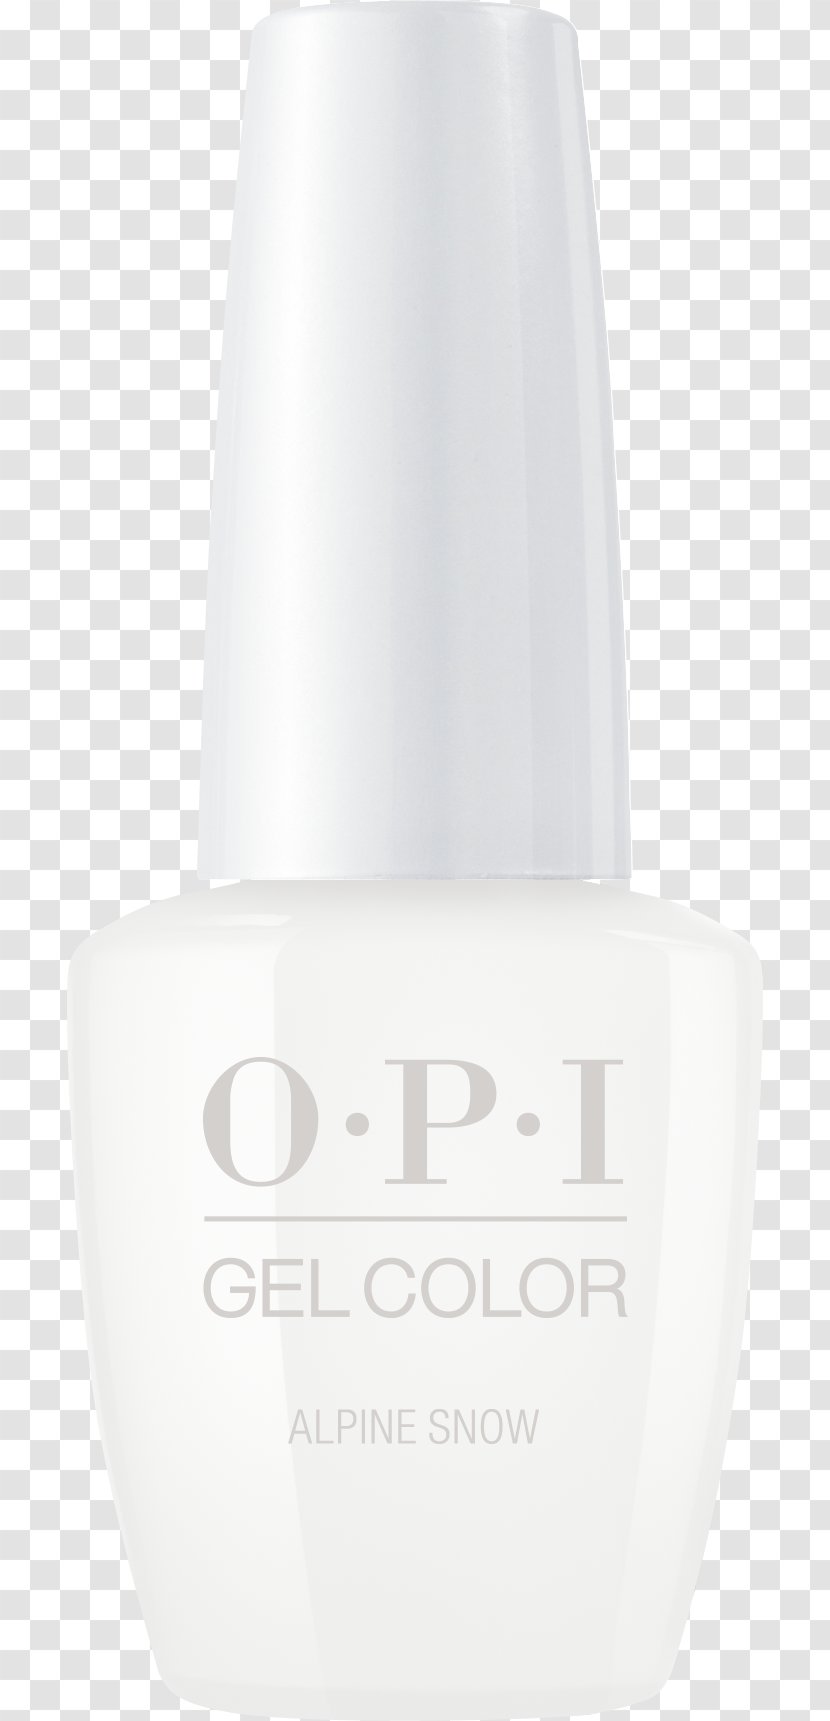 Cosmetics OPI Products GelColor Nail Lacquer Polish - Opi Gelcolor Transparent PNG